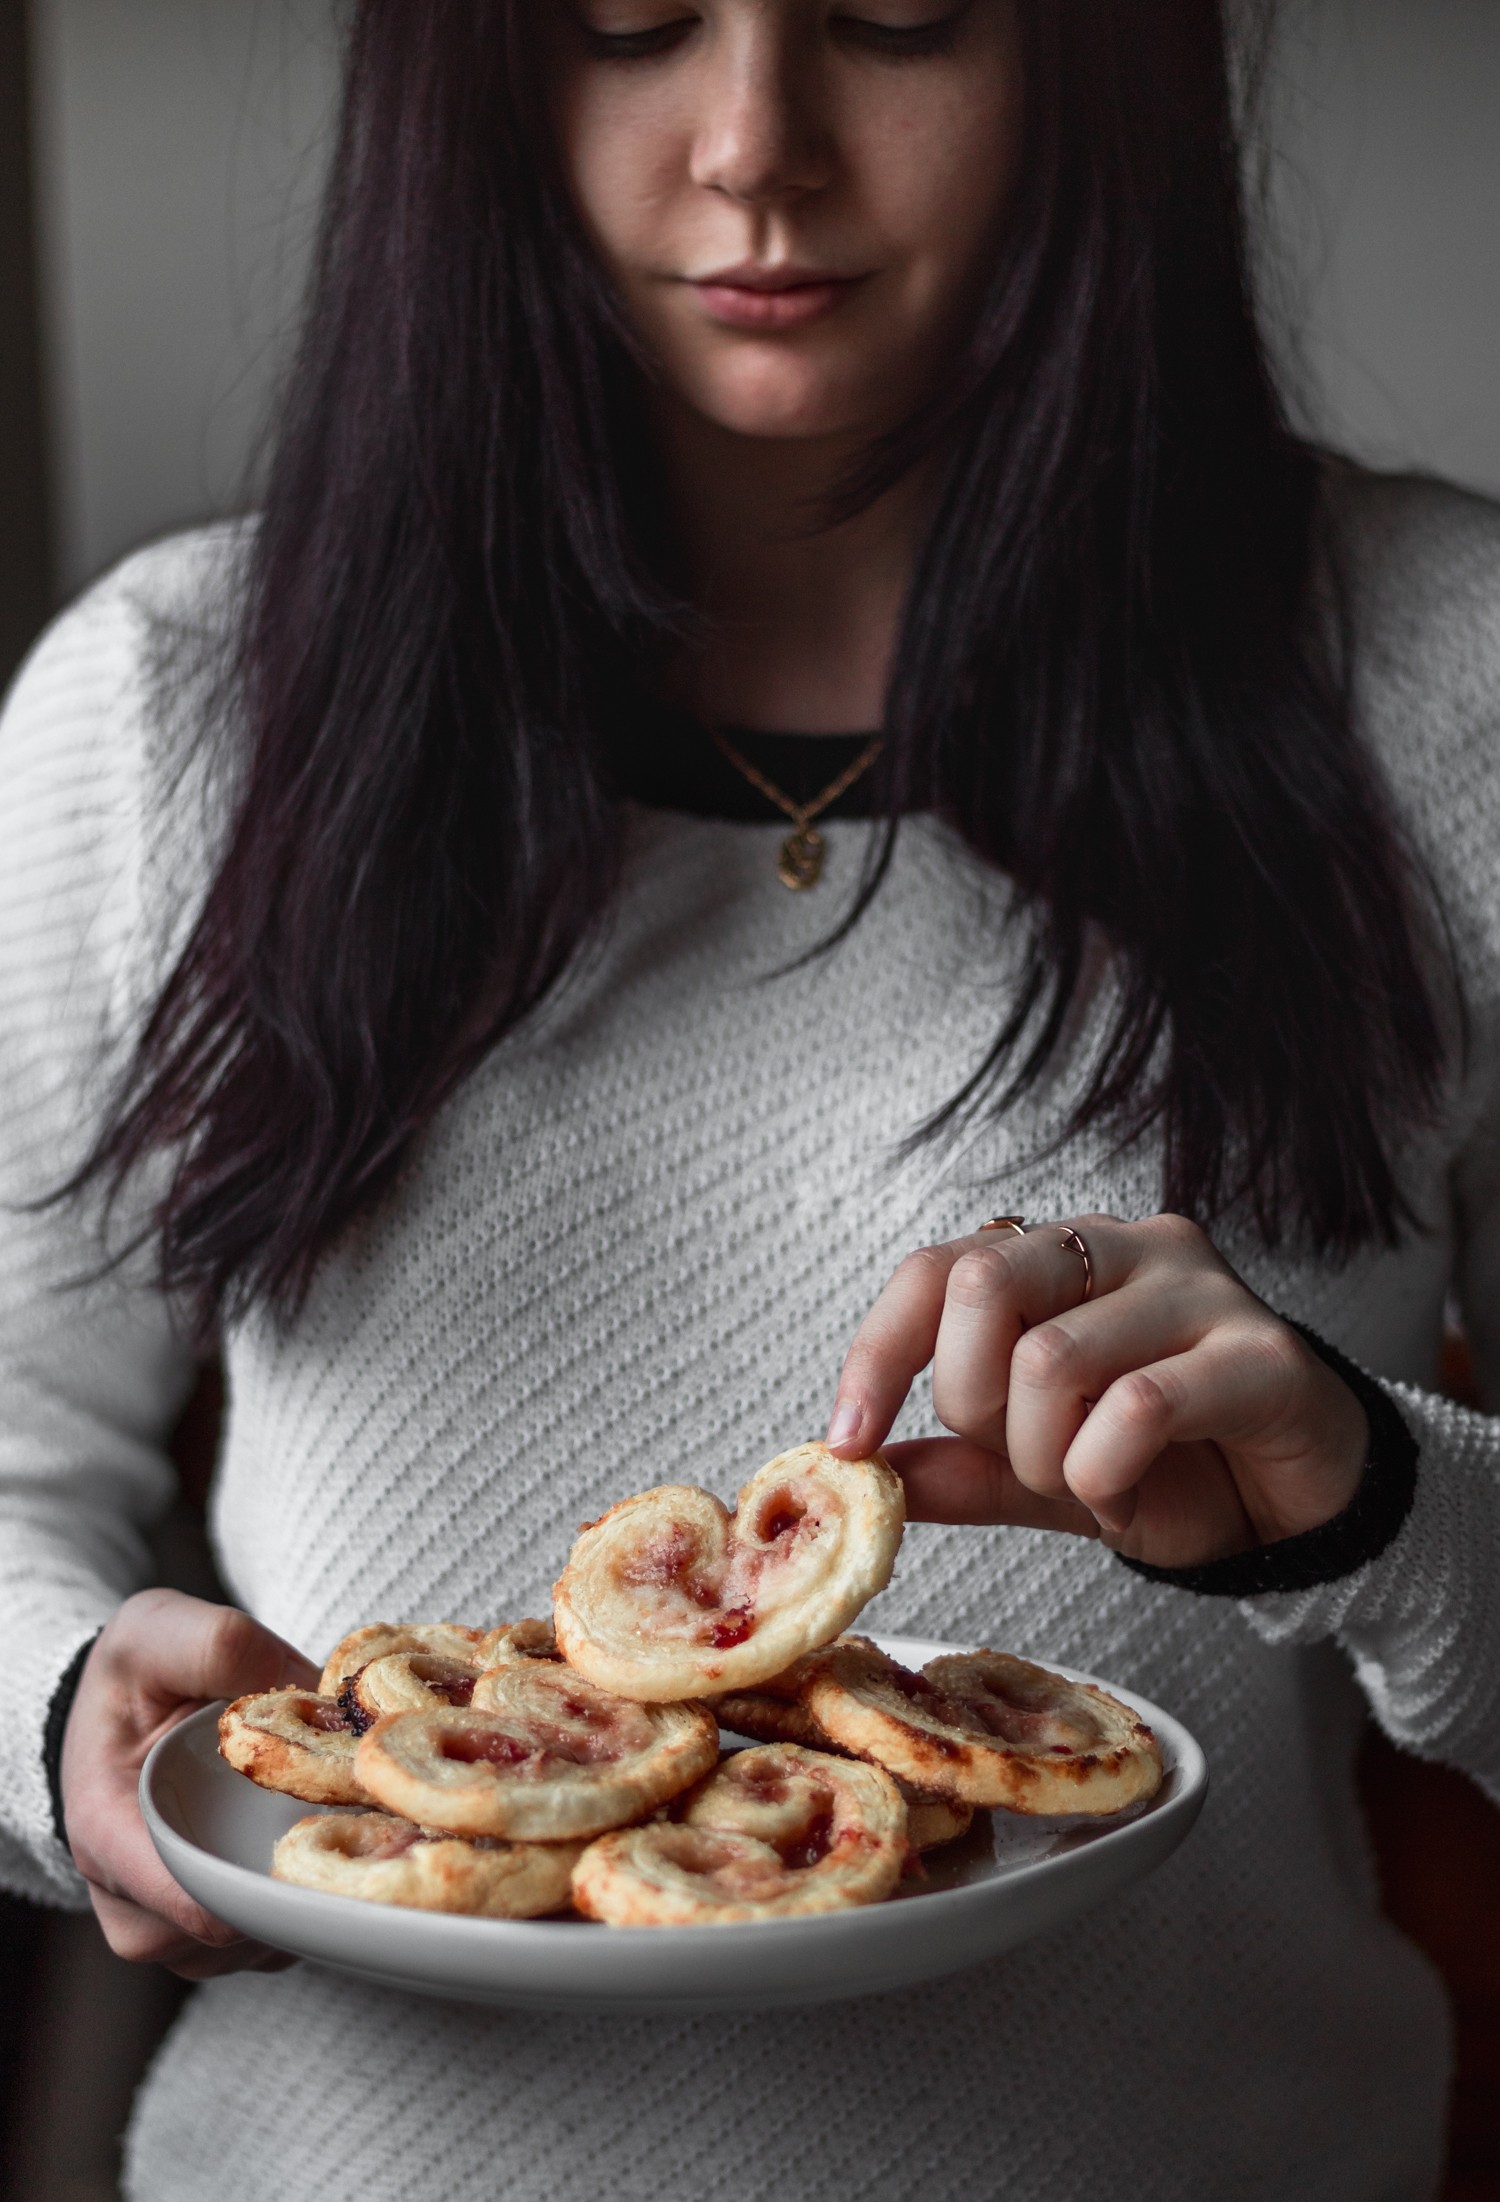 A side image of a woman with dark red hair wearing a white sweater holding a plate of elephant ear cookies.